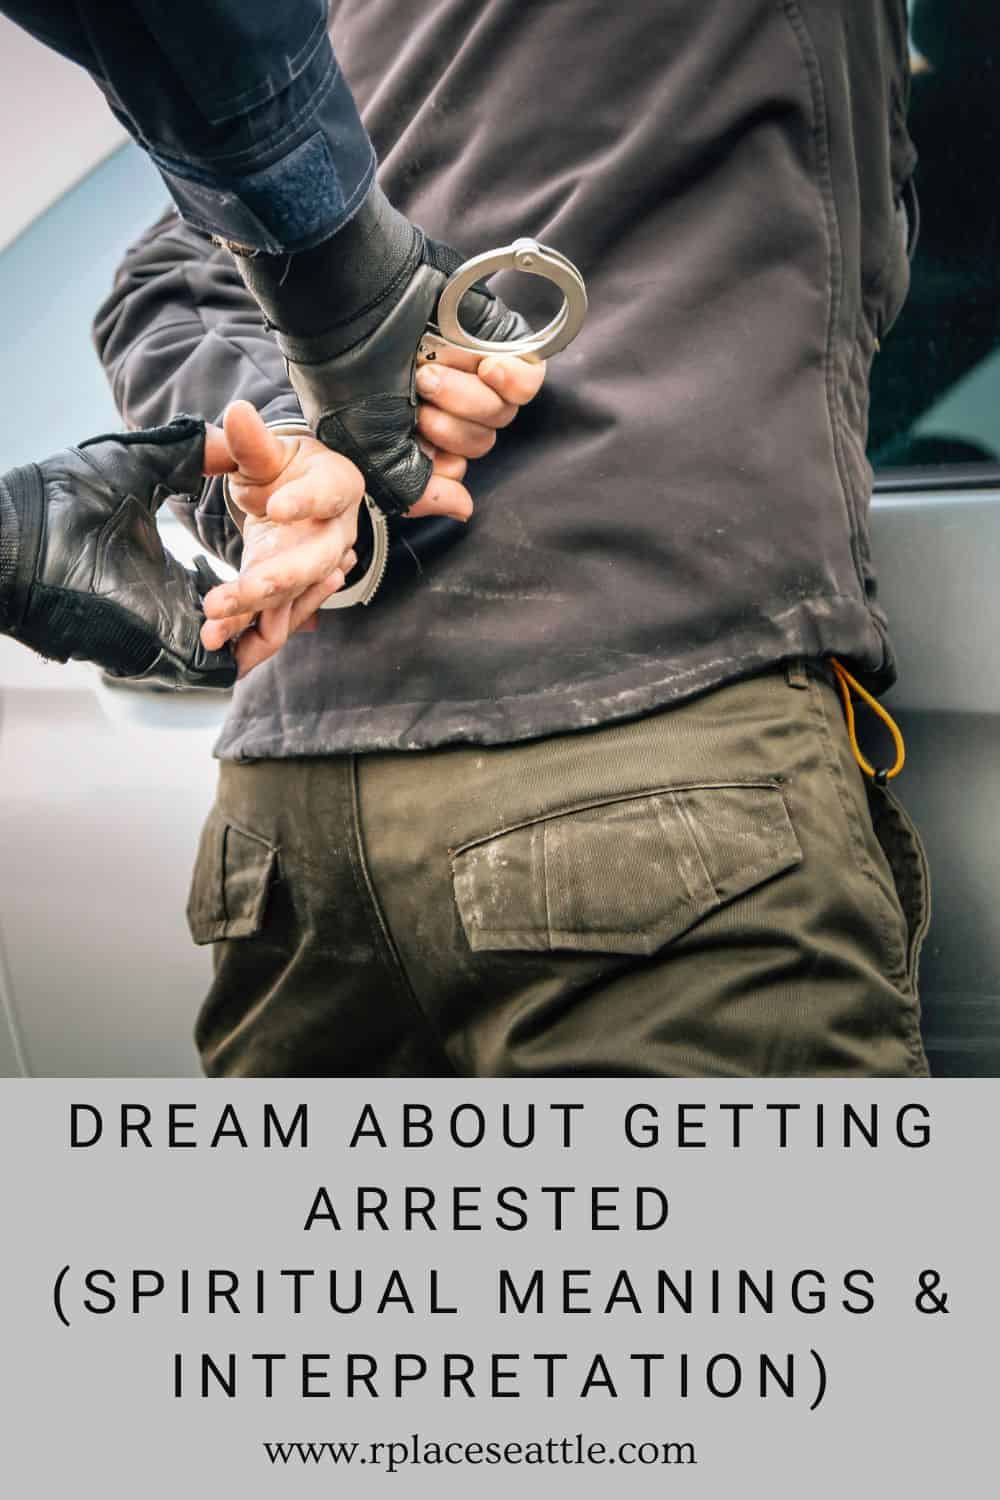 Dream About Getting Arrested (Spiritual Meanings & Interpretation)